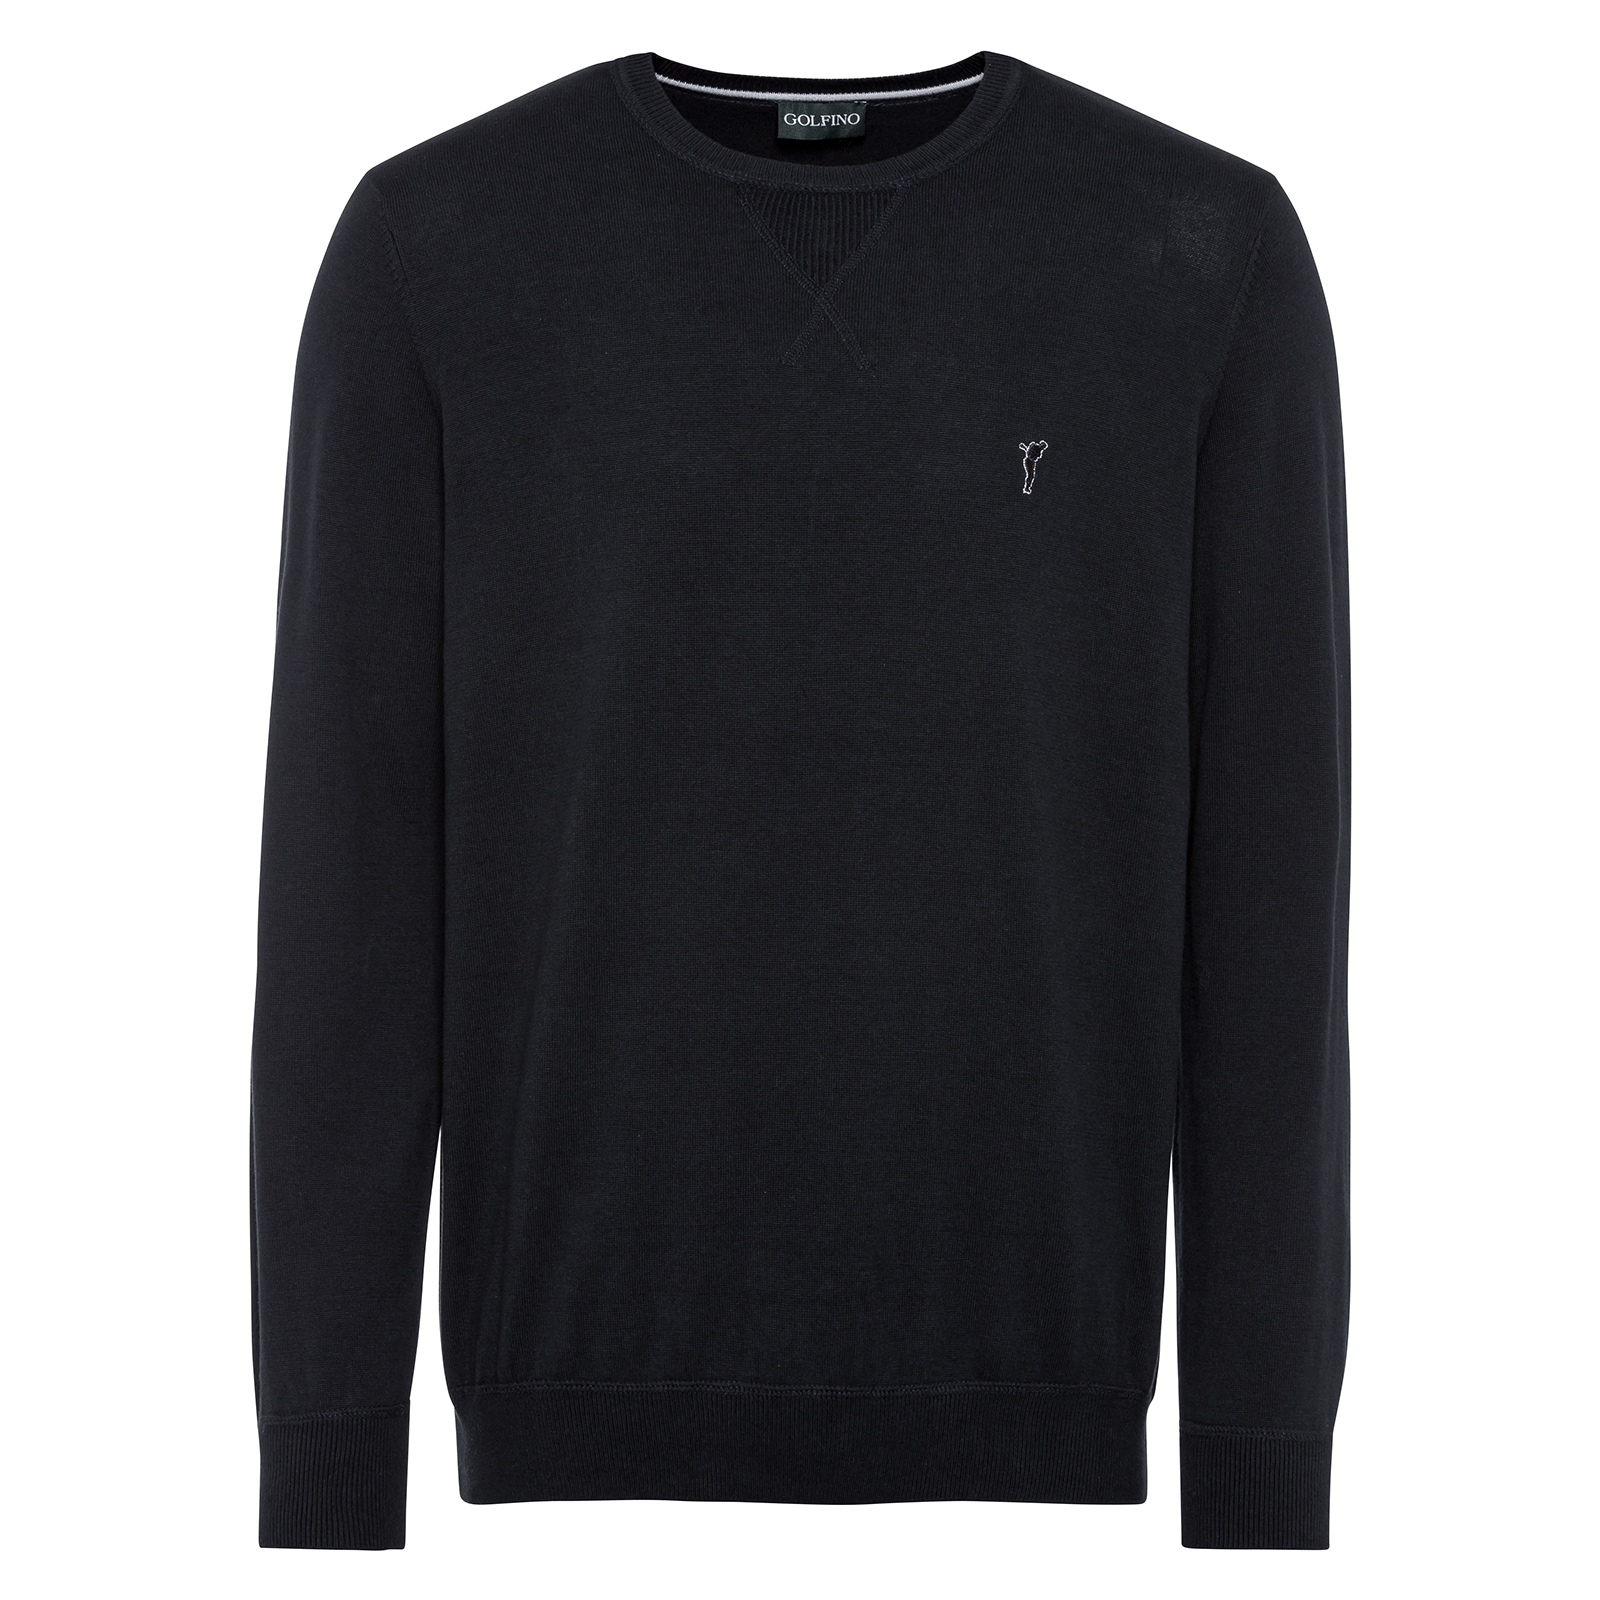 Men's knitted pullover made from soft cotton with a mottled look in regular fit